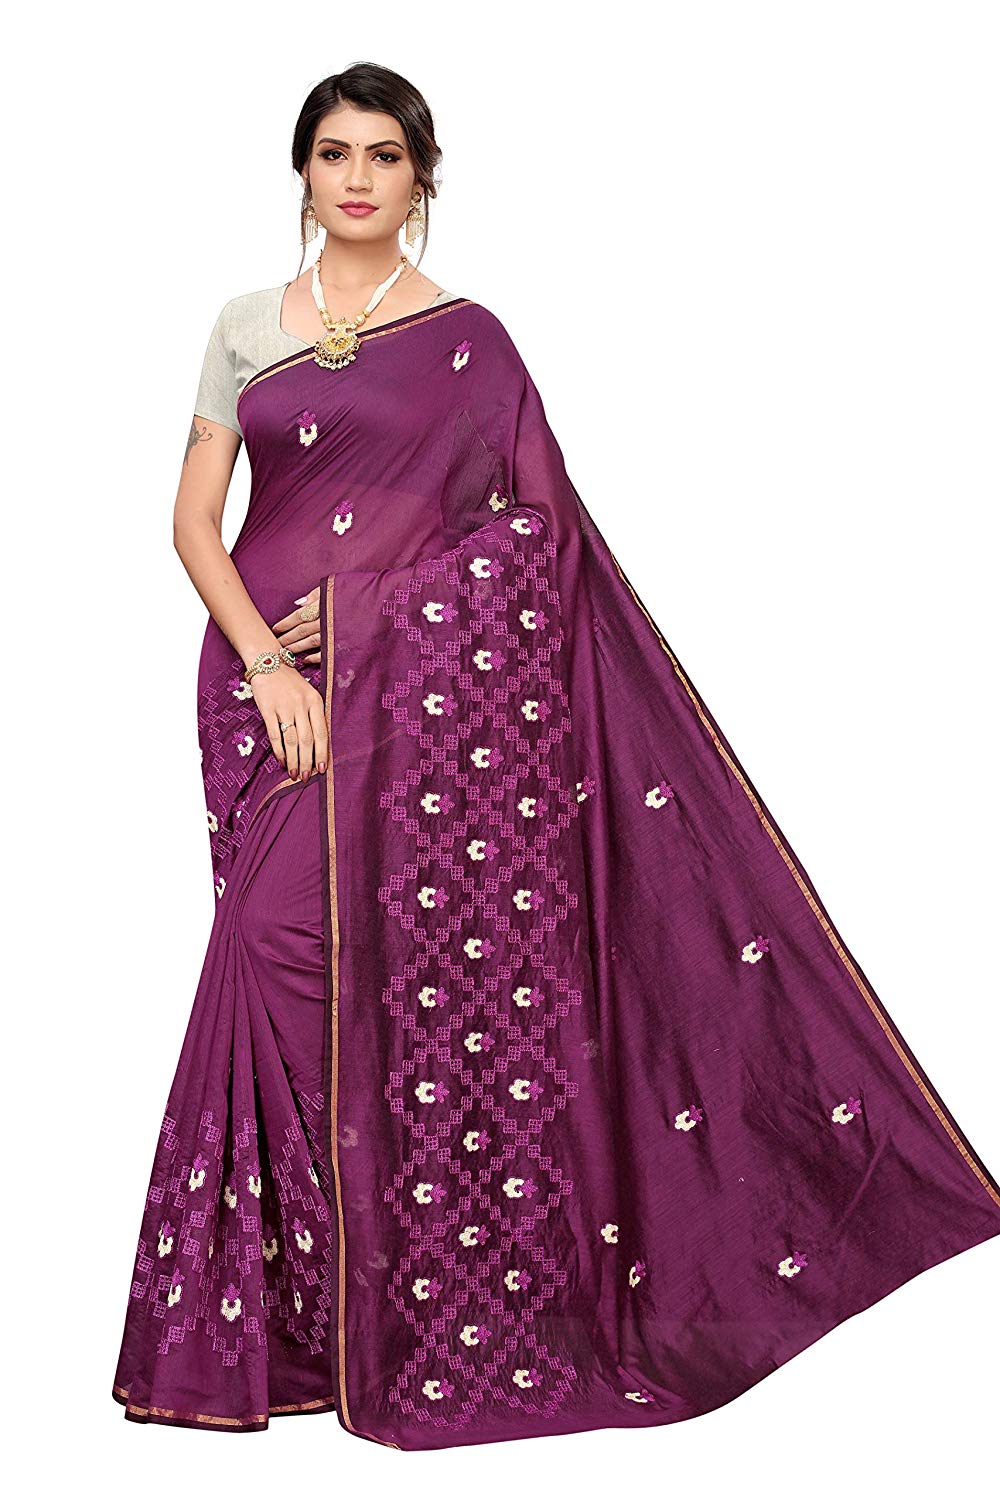 Women's Magenta Color Chanderi Embroided Style Saree With Blouse Piece(CHIKAN-WINE_Free Size)